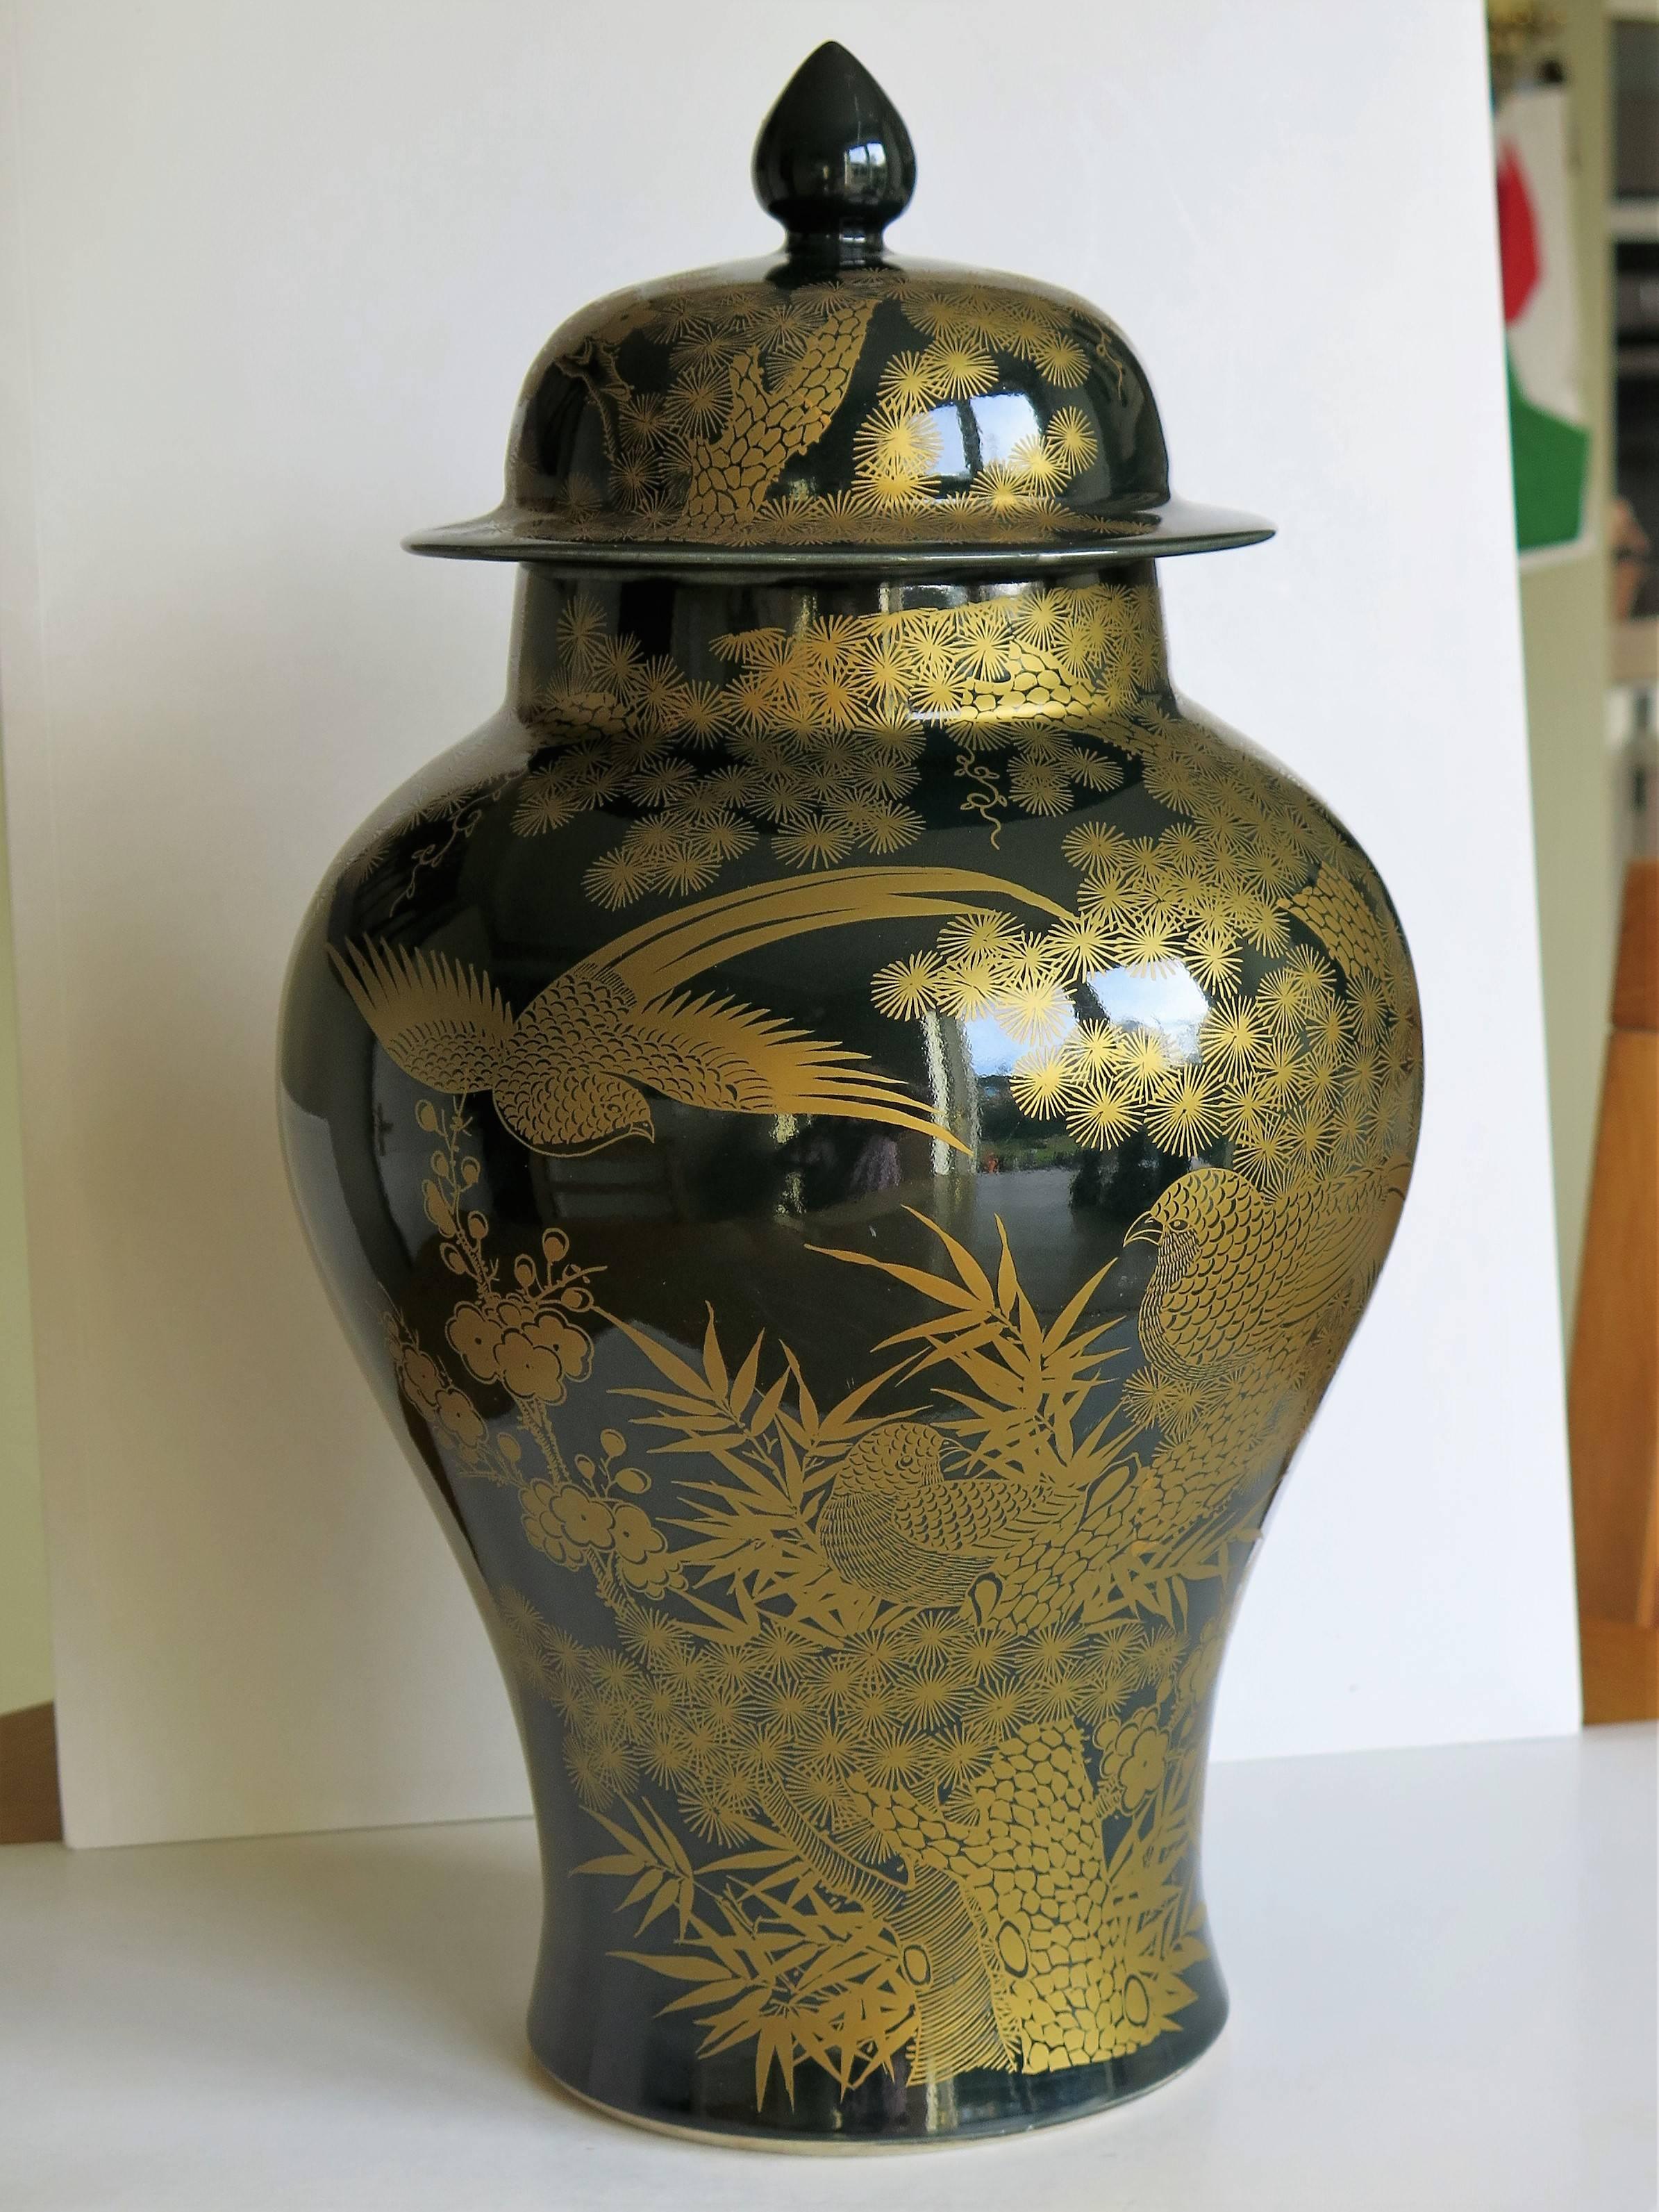 This is a beautiful Chinese porcelain lidded Vase or Jar which we date to the late 19th century, Qing period.

The vase has a monochrome (single color) glaze in a deep dark green. It has then been finely hand decorated in gilt (gold) with birds set